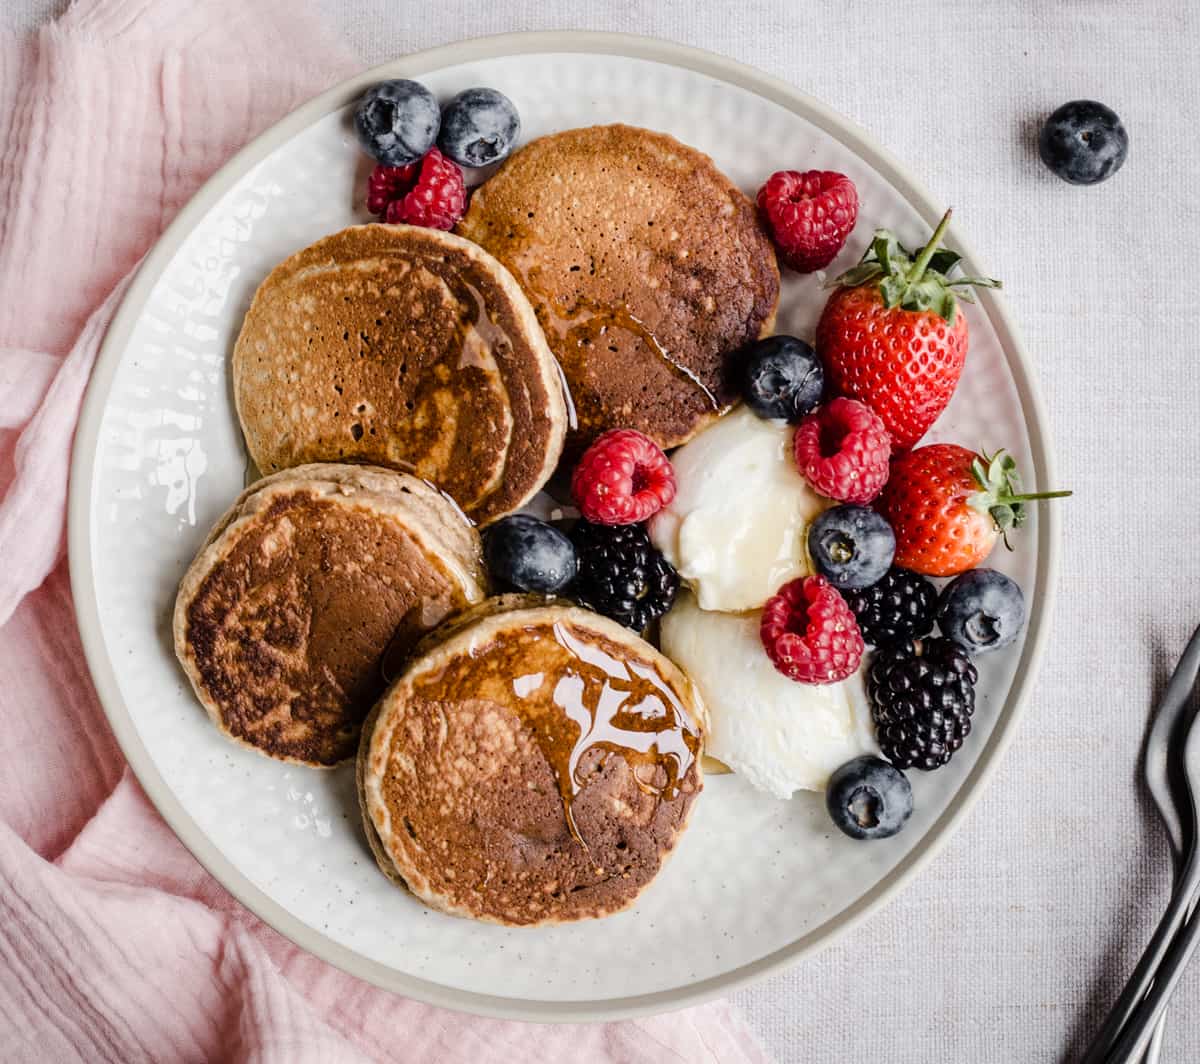 Pancakes on a plate with berries next to forks